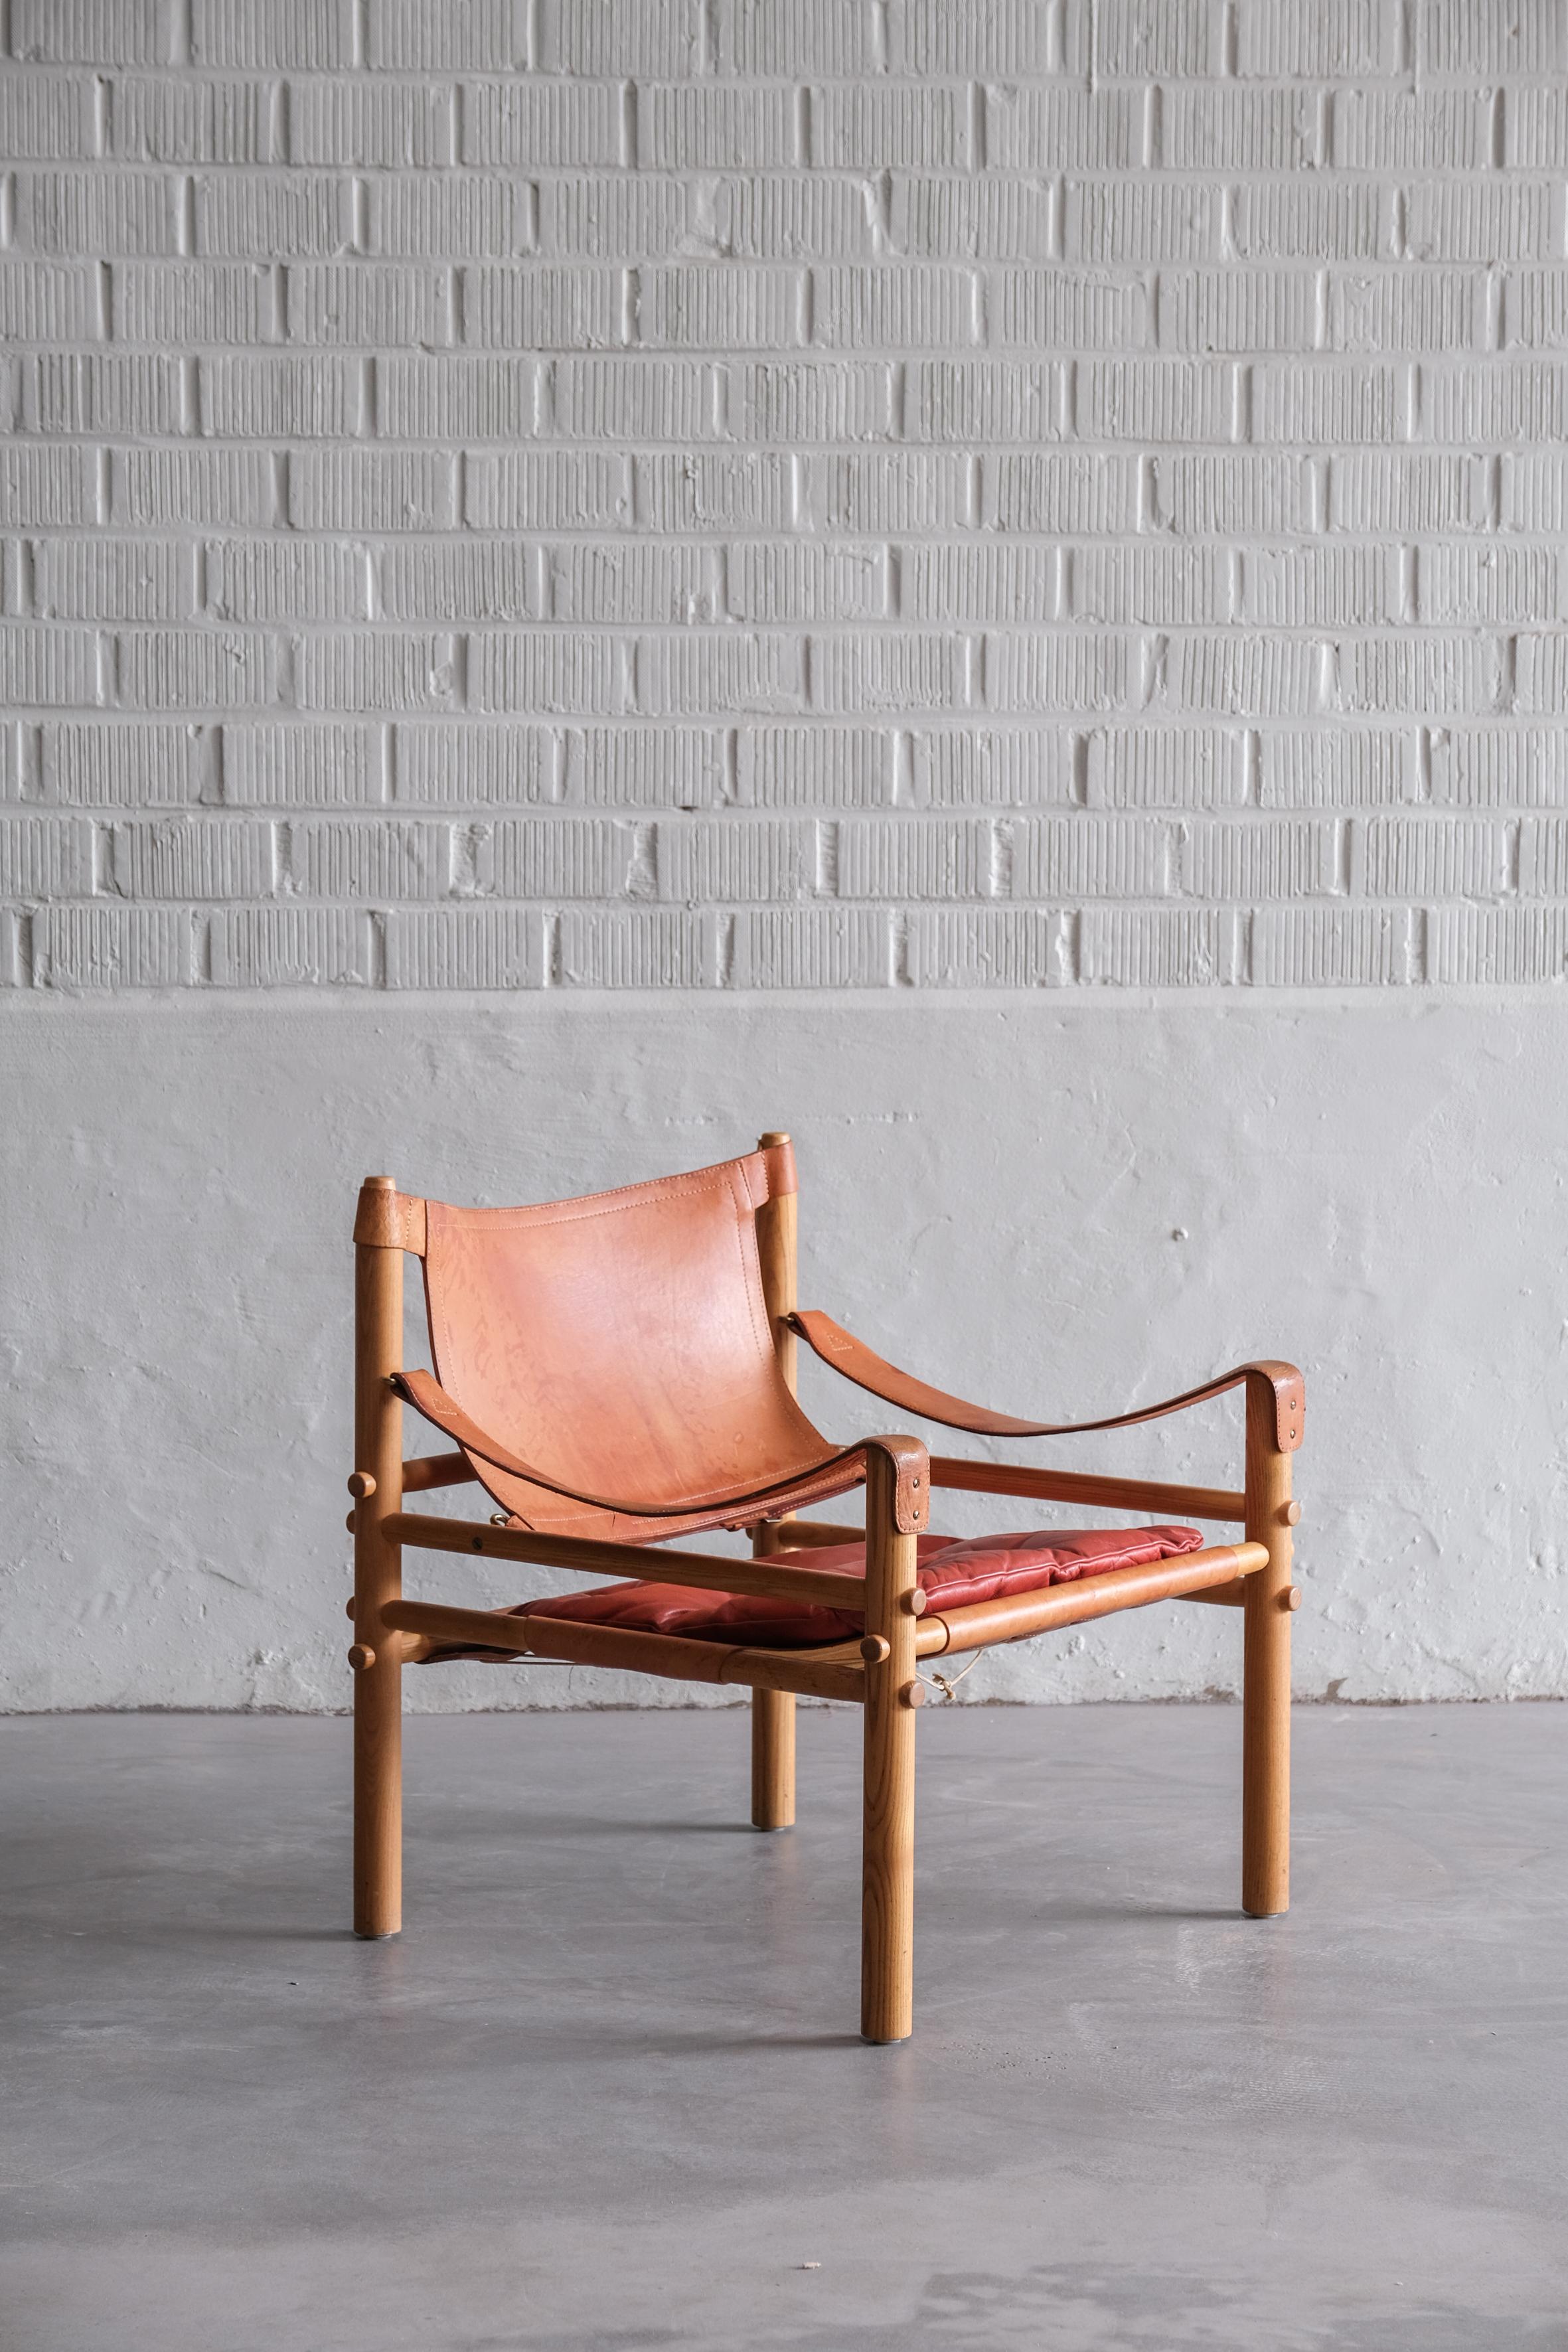 Original Safari chair designed by Arne Norell made out of wood and leather.
beautiful patina on the leather. 